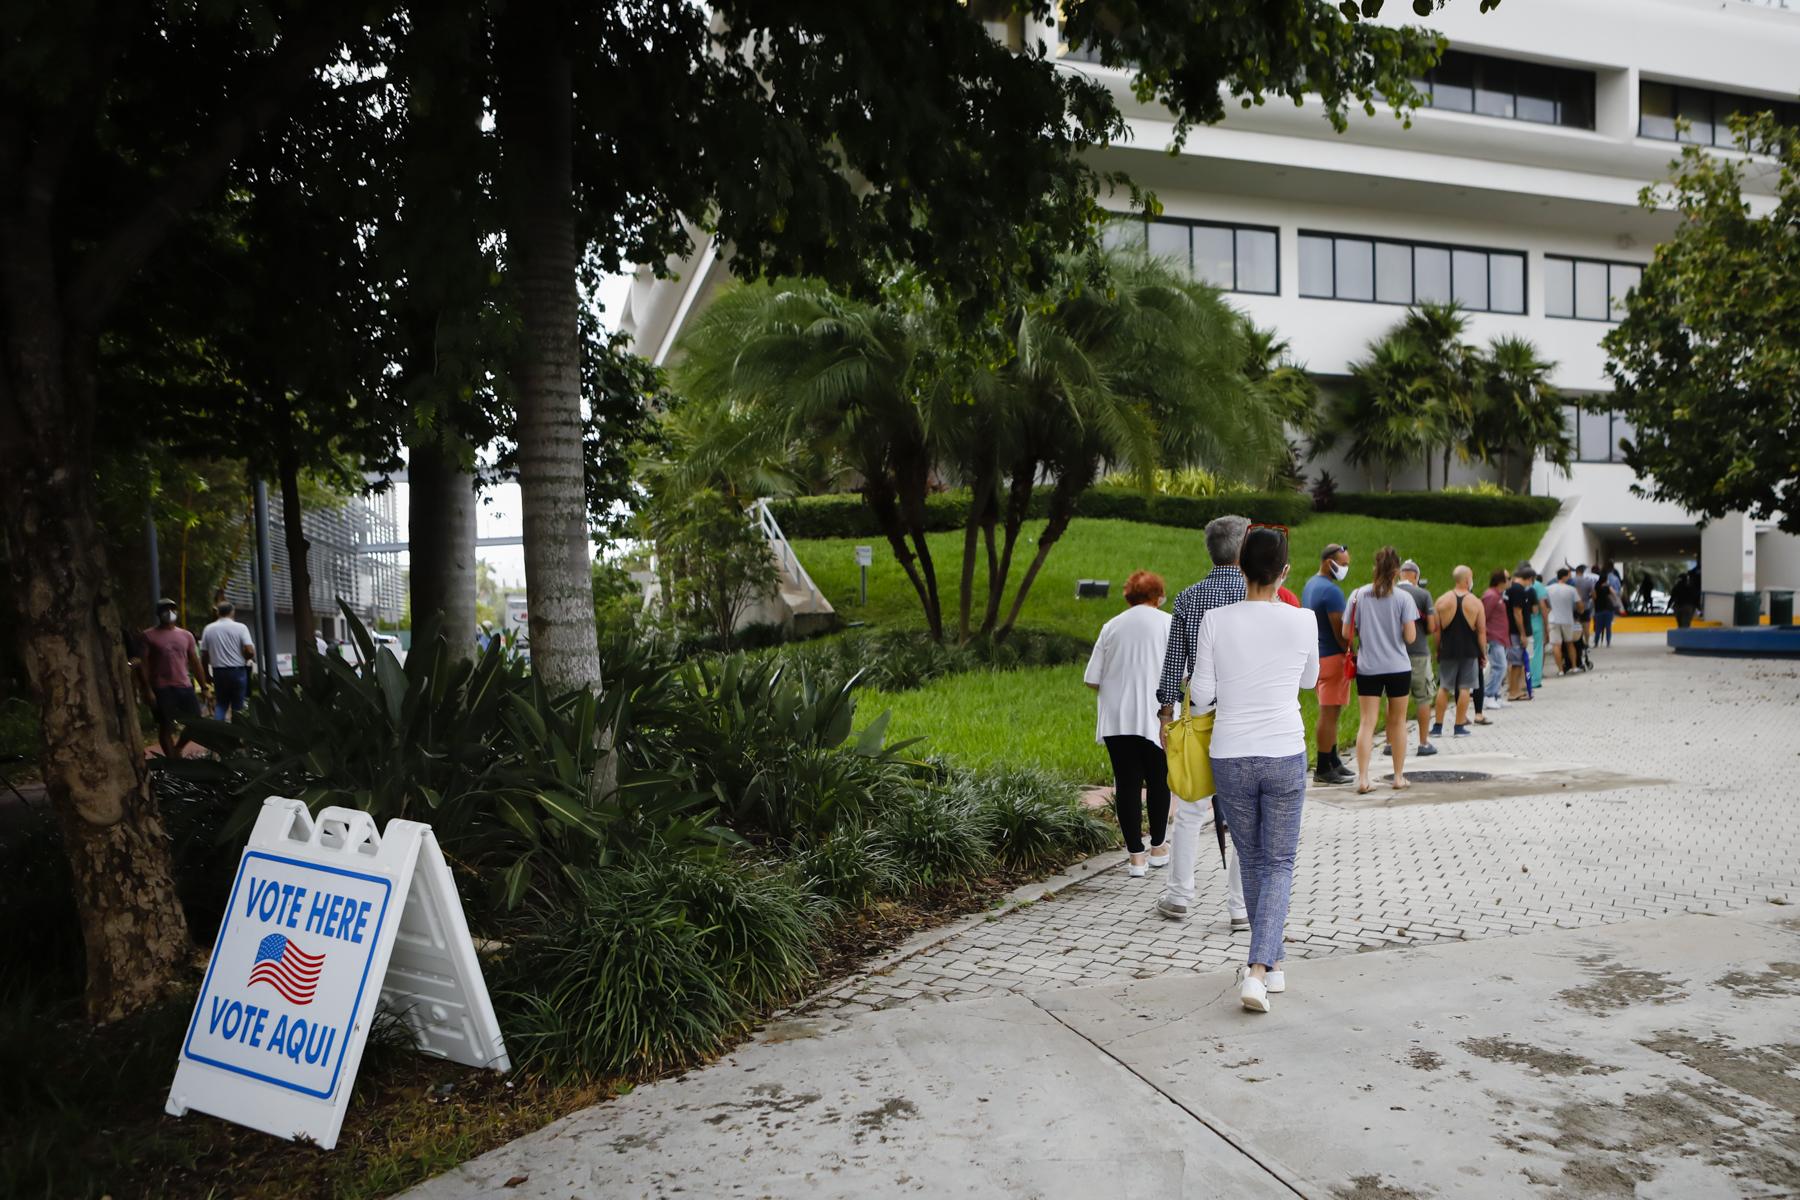 Election 2020 @ Miami, FL - Voters wait in line to cast their early ballots at Miami...